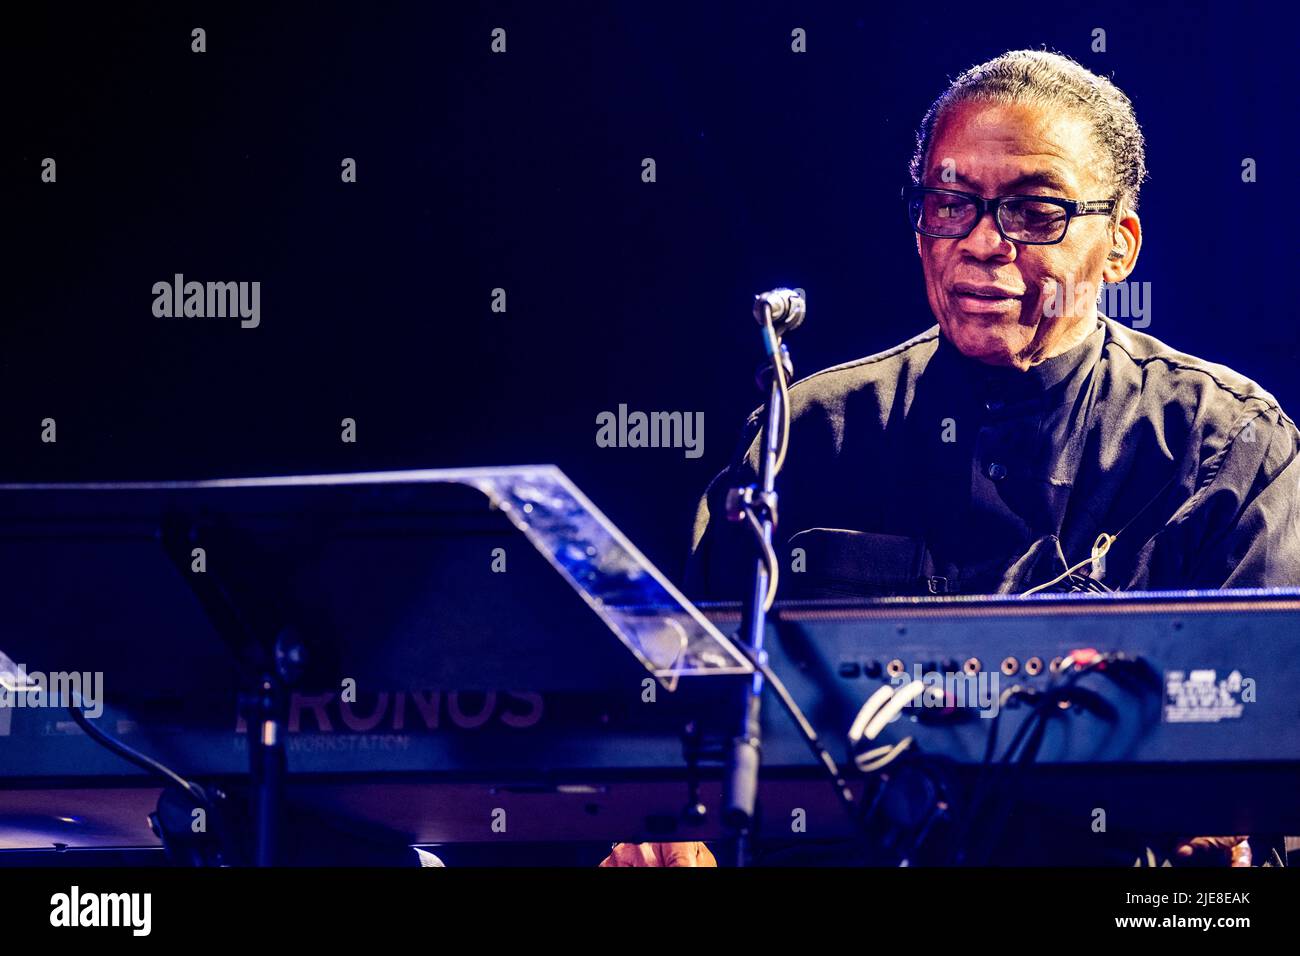 Herbie Hancock performs on the stage during his concert at Puteaux Parvis de la Défense, in France, on June 25, 2022. American jazz pianist, modern music icon, Herbie Hancock has transcended limits and genres while maintaining his unmistakable voice. After more than sixty years of career and fourteen Grammy Awards, including album of the year for River: The Joni Letters, he continues to amaze audiences around the world. Herbie Hancock : piano, Terence Blanchard: trumpet, James Genus: bass, Lionel Loueke: guitar, Justin Tyson : drums. Photo by Pierrick Villette/ABACAPRESS.COM Stock Photo